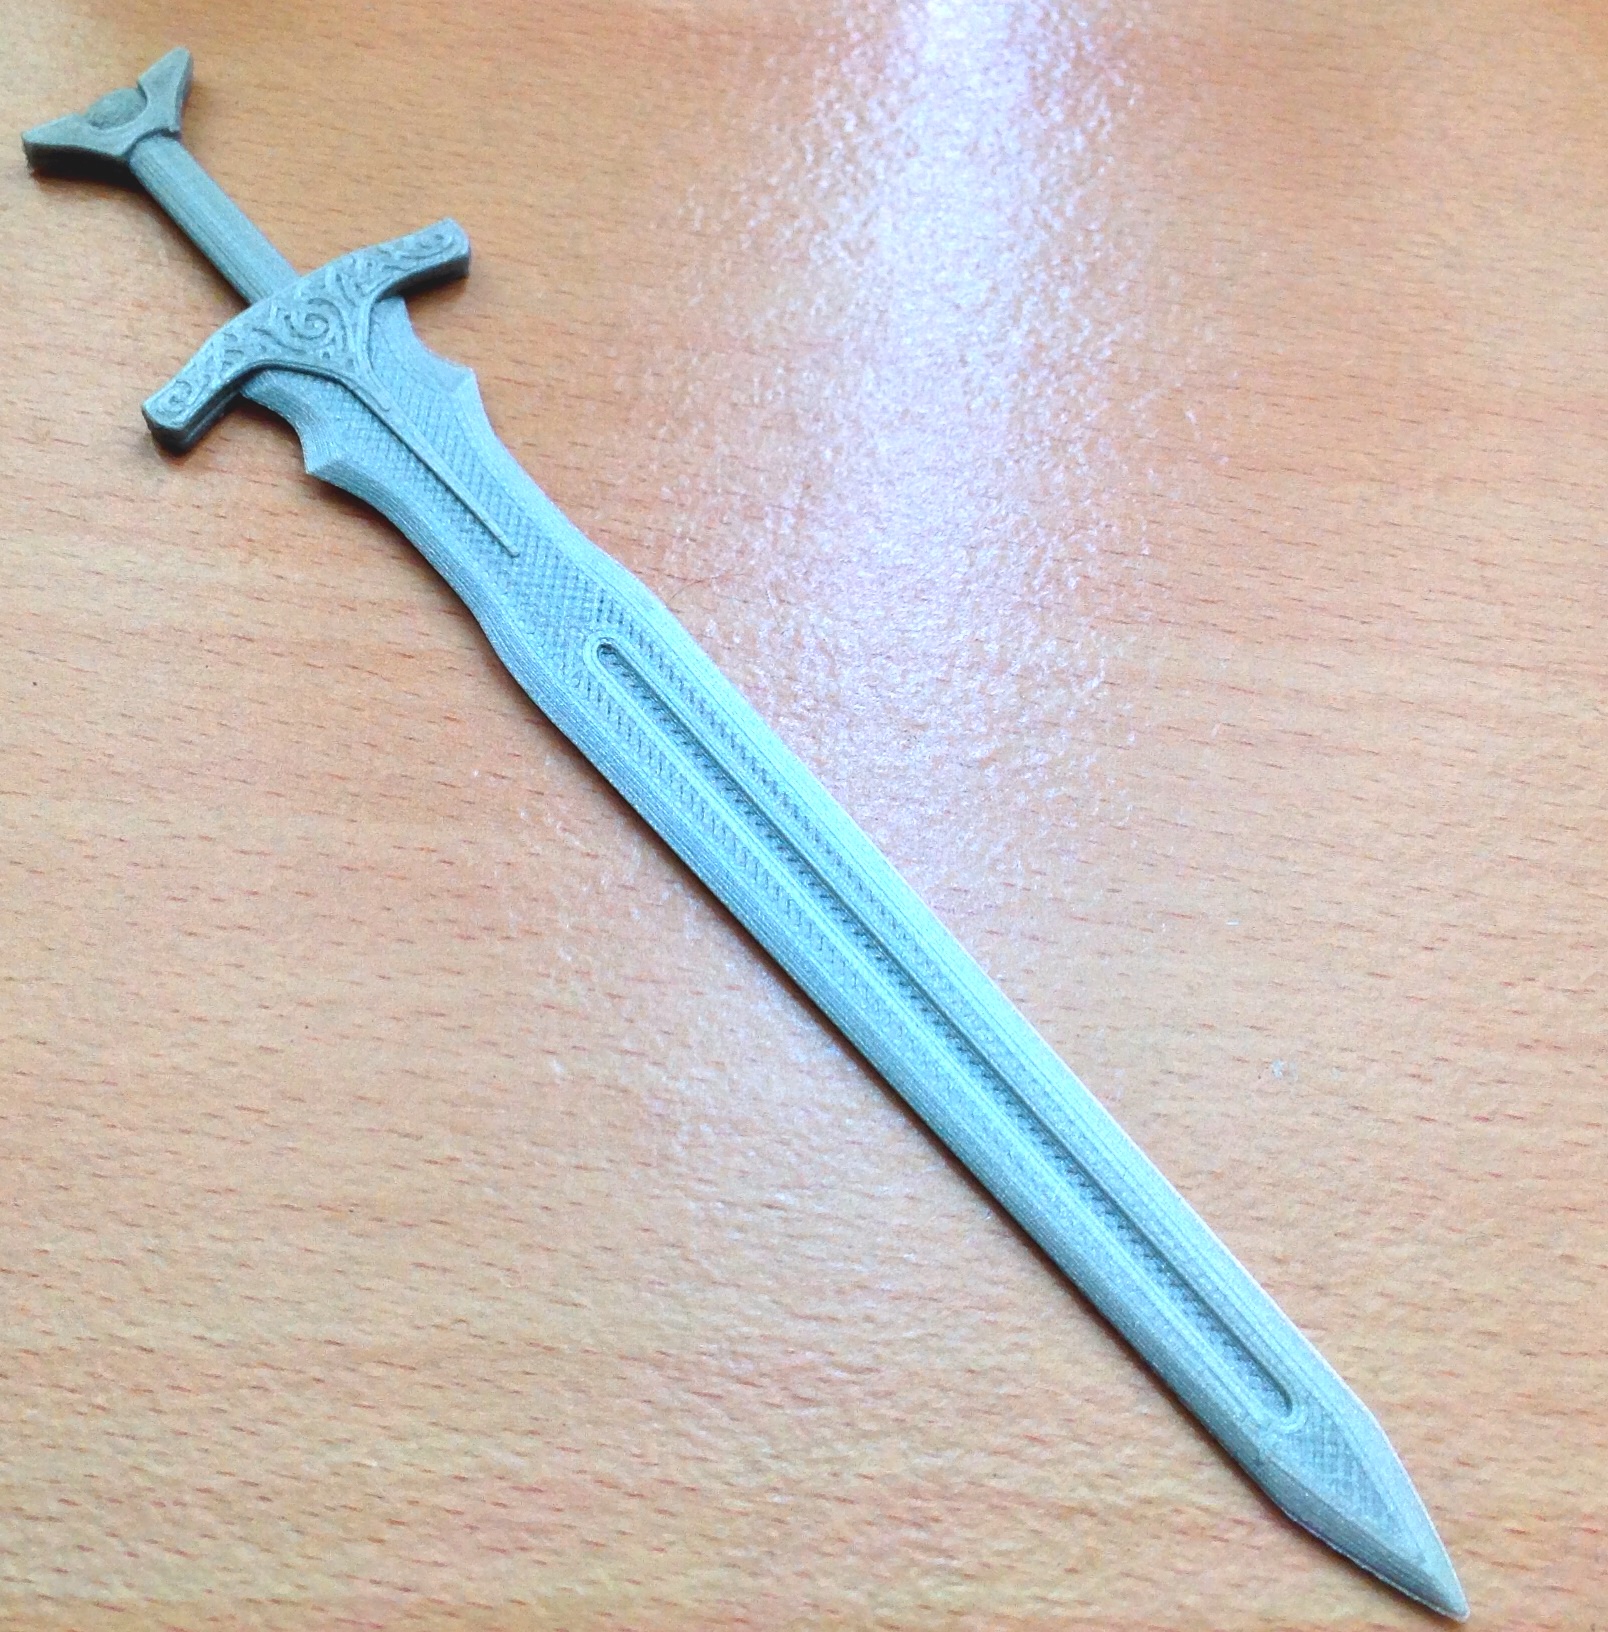 Gateros Plating 3D Prints 'Skyrim' Swords that Look and Feel Like the